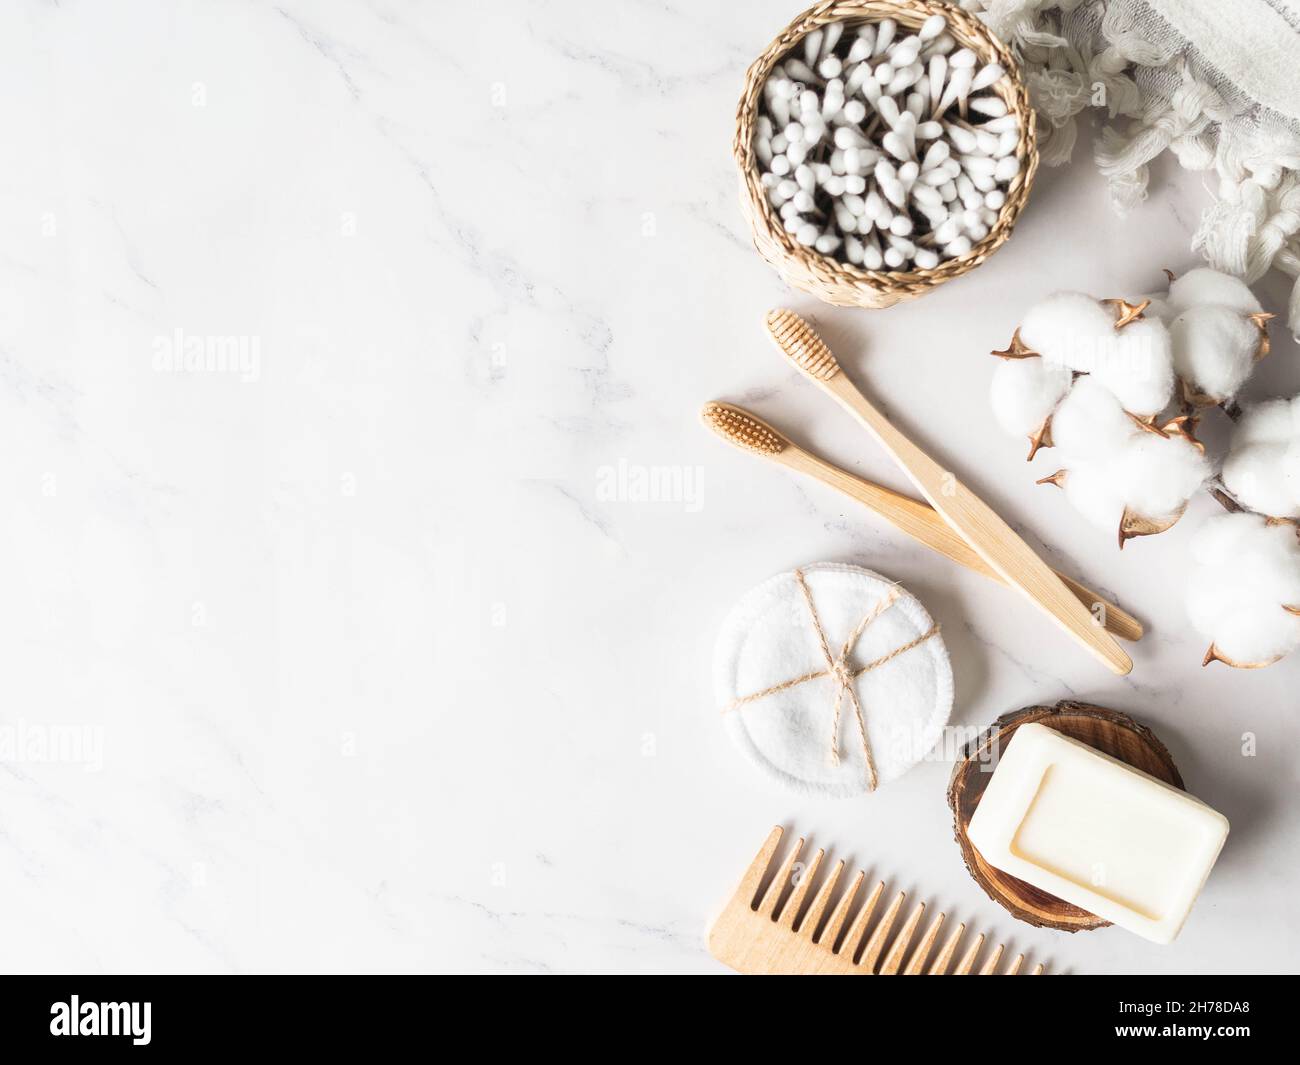 Zero waste personal bathroom accessories. Wooden brush, soap, toothbrush, cotton towel on marble background. Free plastic concept. Eco-friendly home c Stock Photo